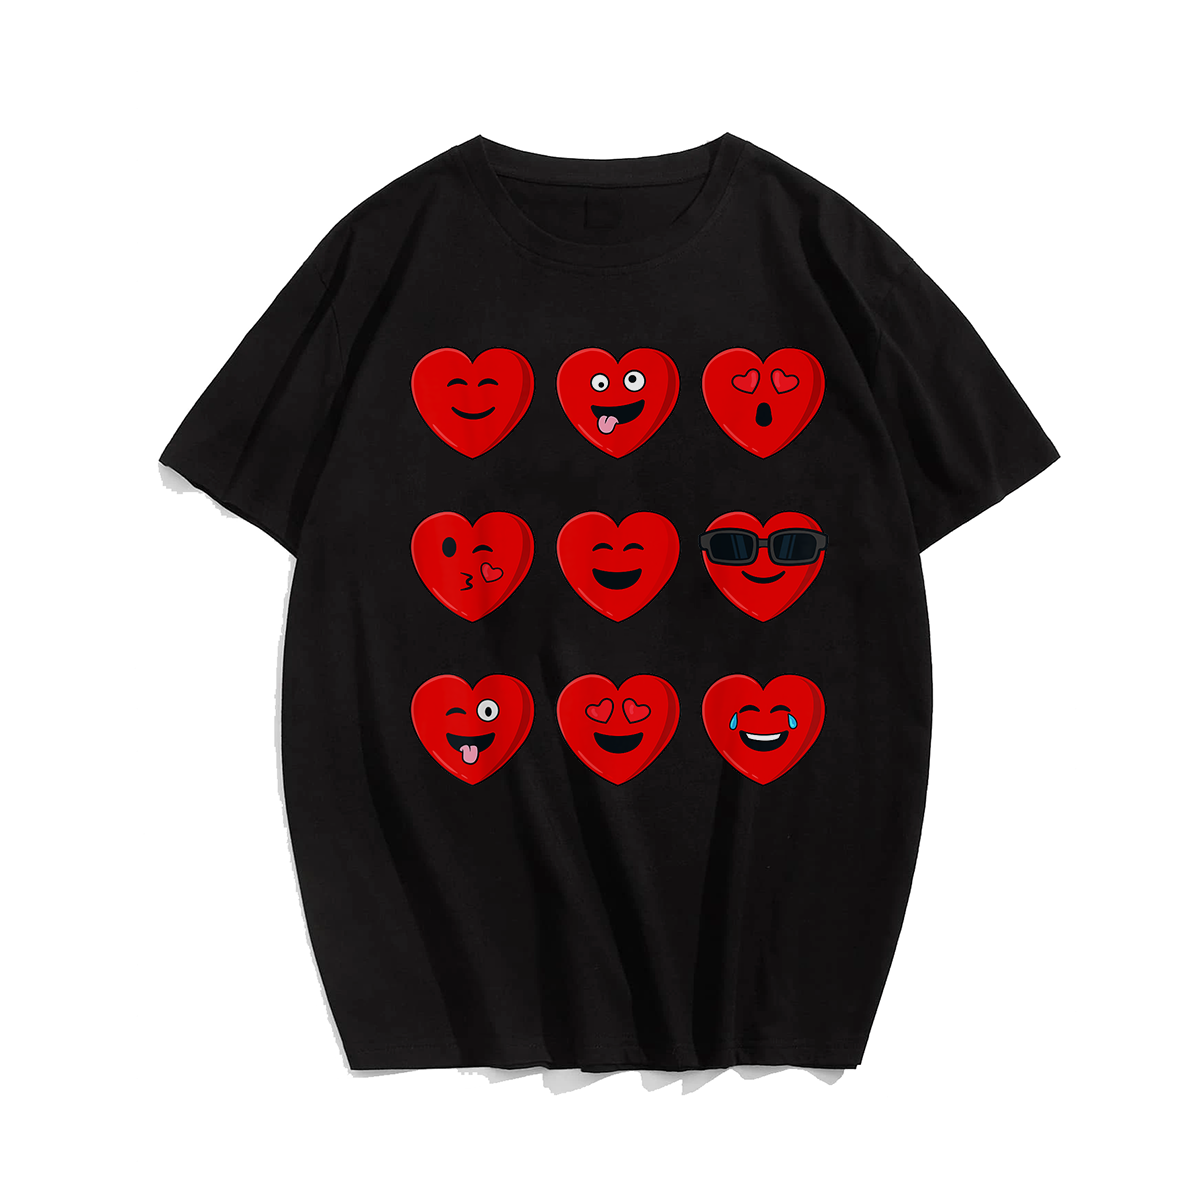 Funny Faces Hearts Valentines Day T-Shirt, Men Plus Size Oversize T-shirt for Big & Tall Man